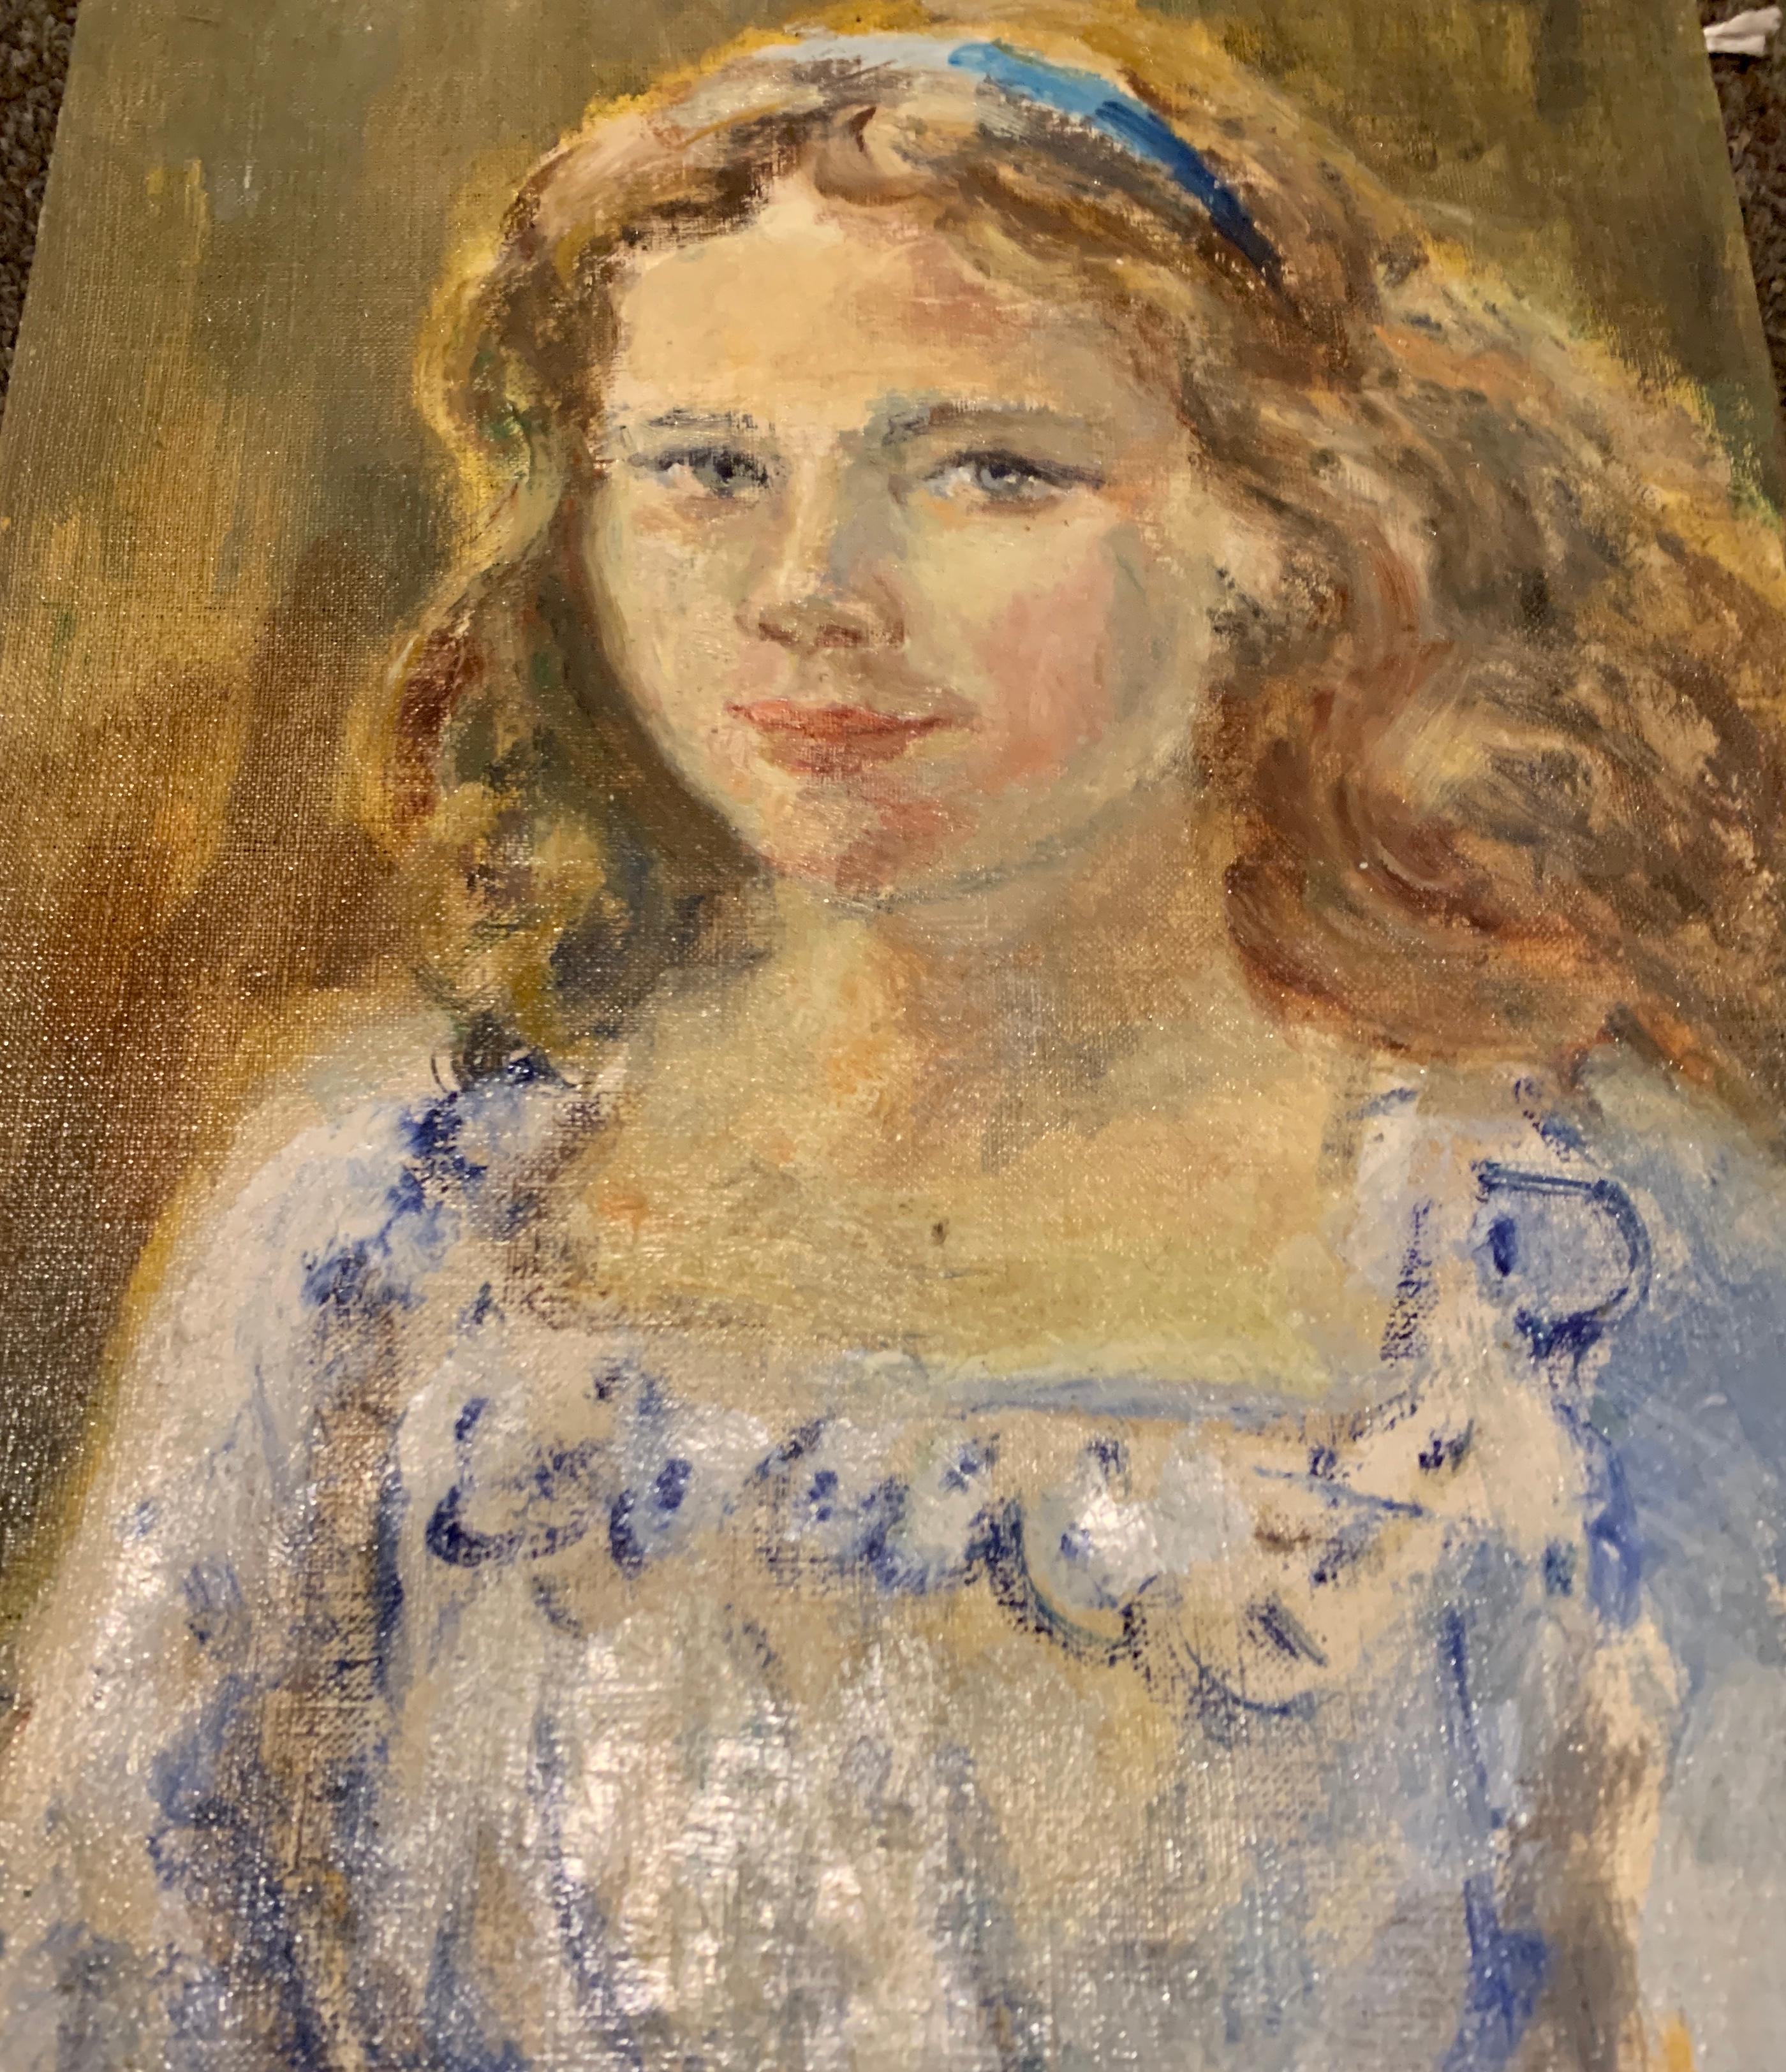 Unknown Portrait Painting - Portrait of Girl In Blue And White Dress by Bielecka/ Oil On Canvas